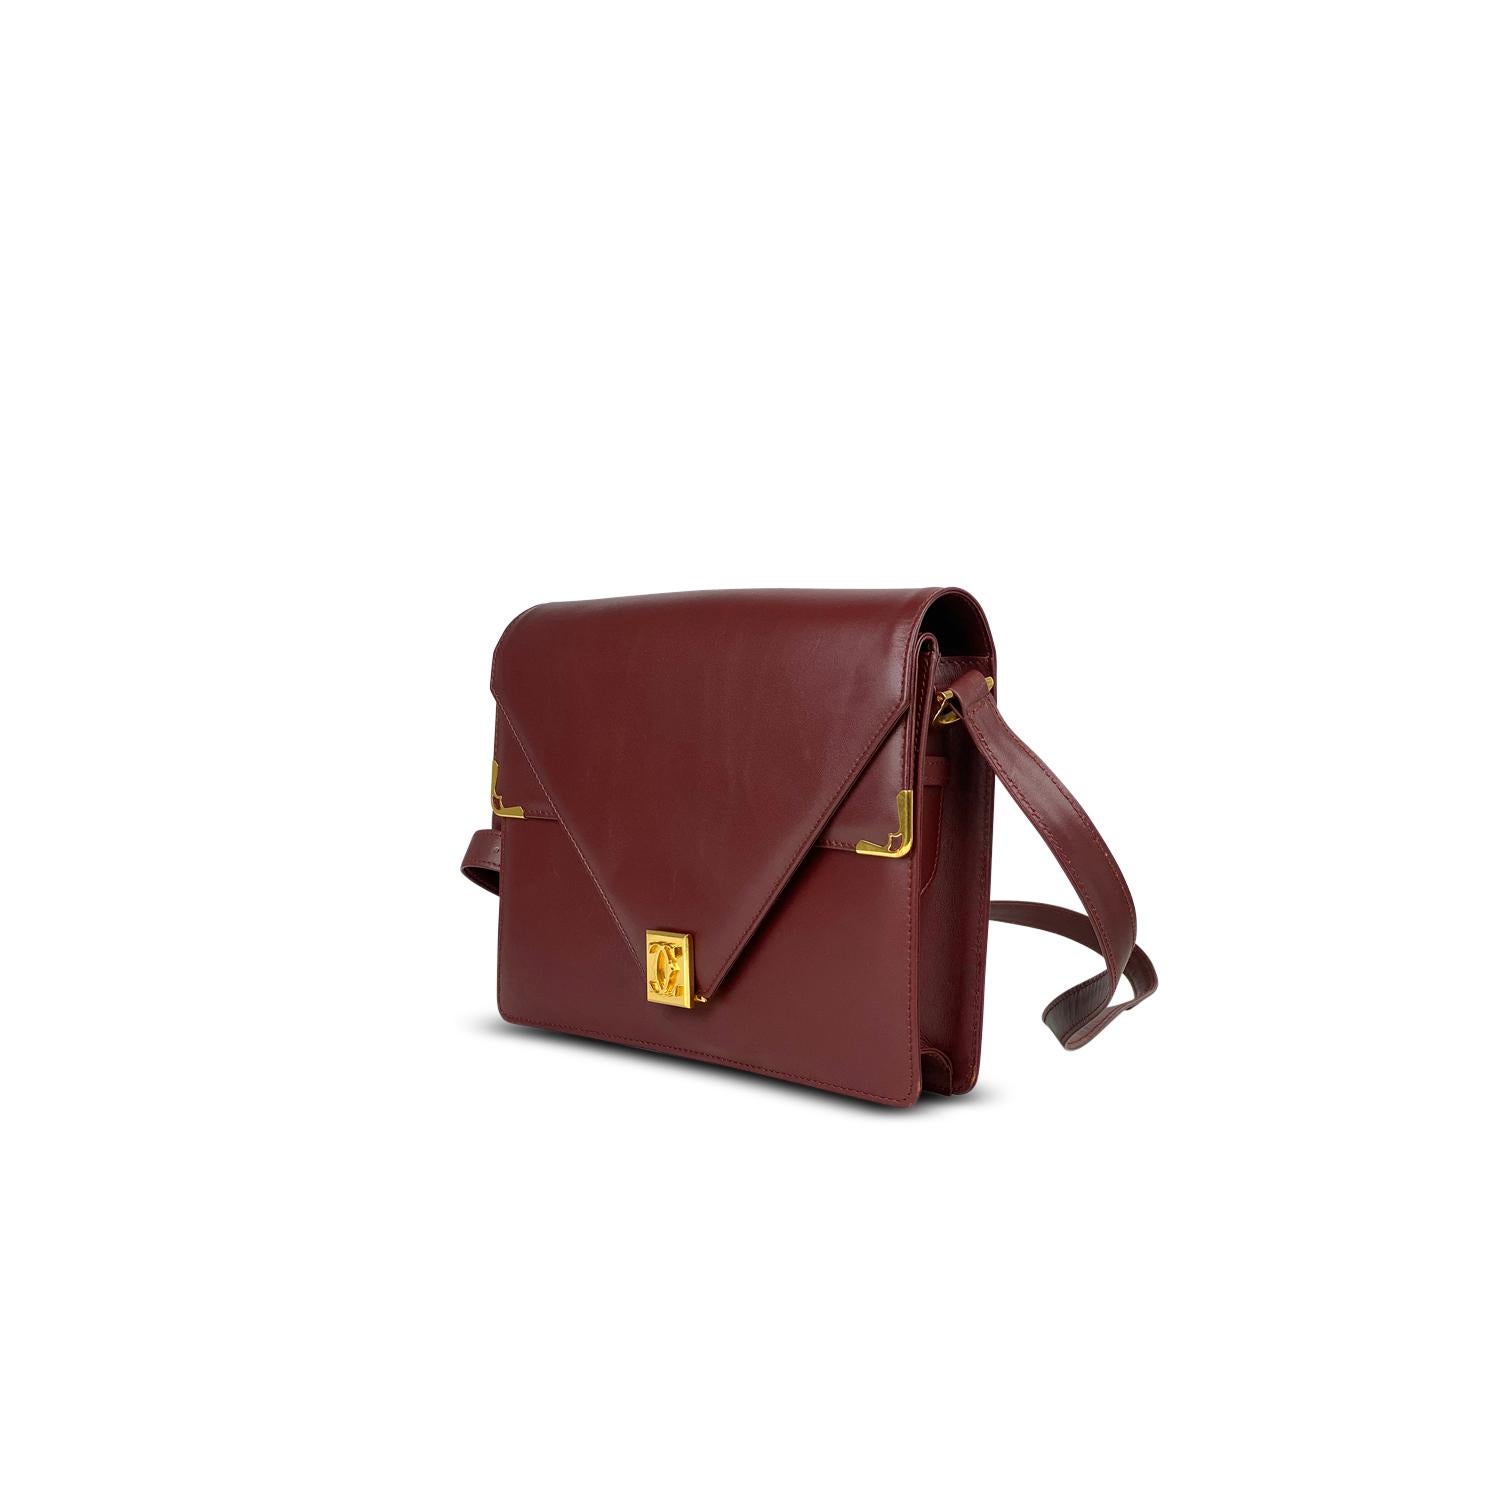 Burgundy leather Cartier Les Must De crossbody bag with

– Gold-tone hardware
– Single adjustable flat shoulder strap
– Single flap pocket under flap
– Tonal leather lining, dual pockets at interior walls; one with zip closure and flip-lock closure